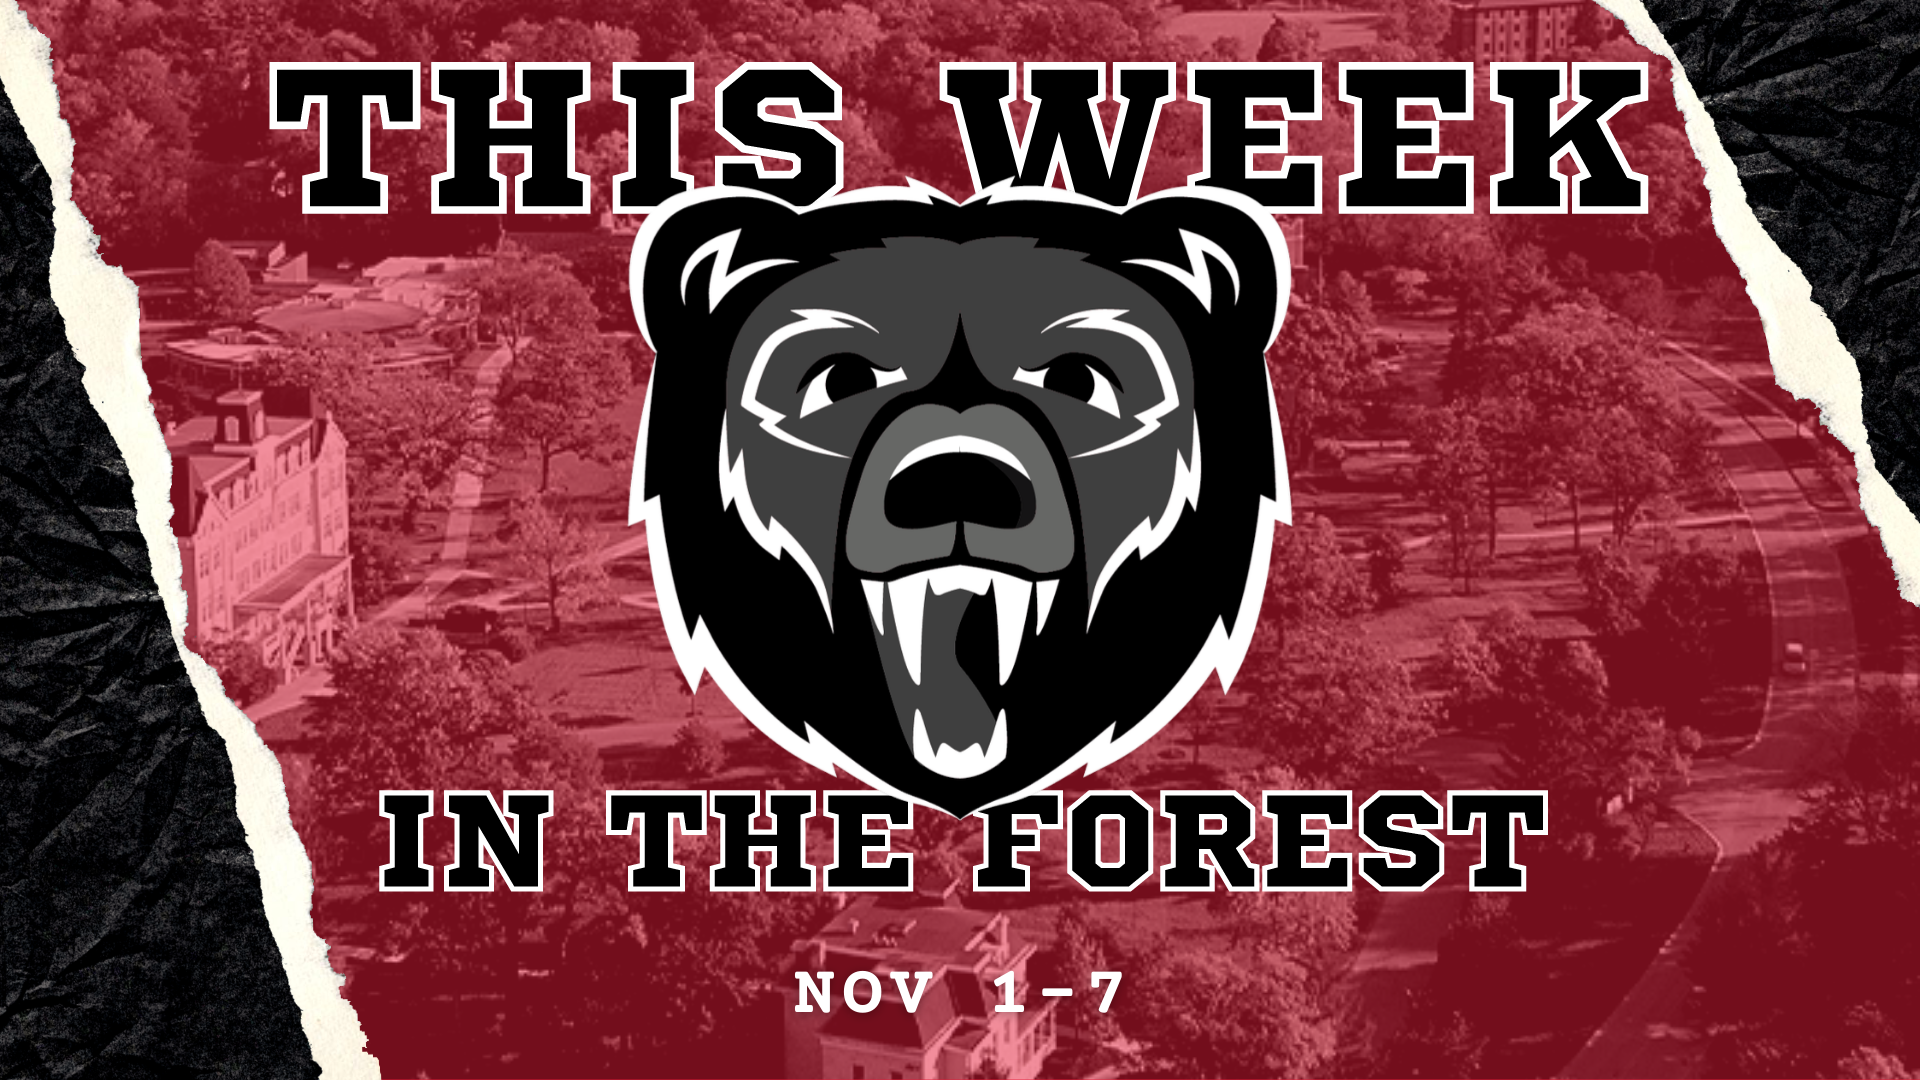 This Week in the Forest: Nov. 1-7